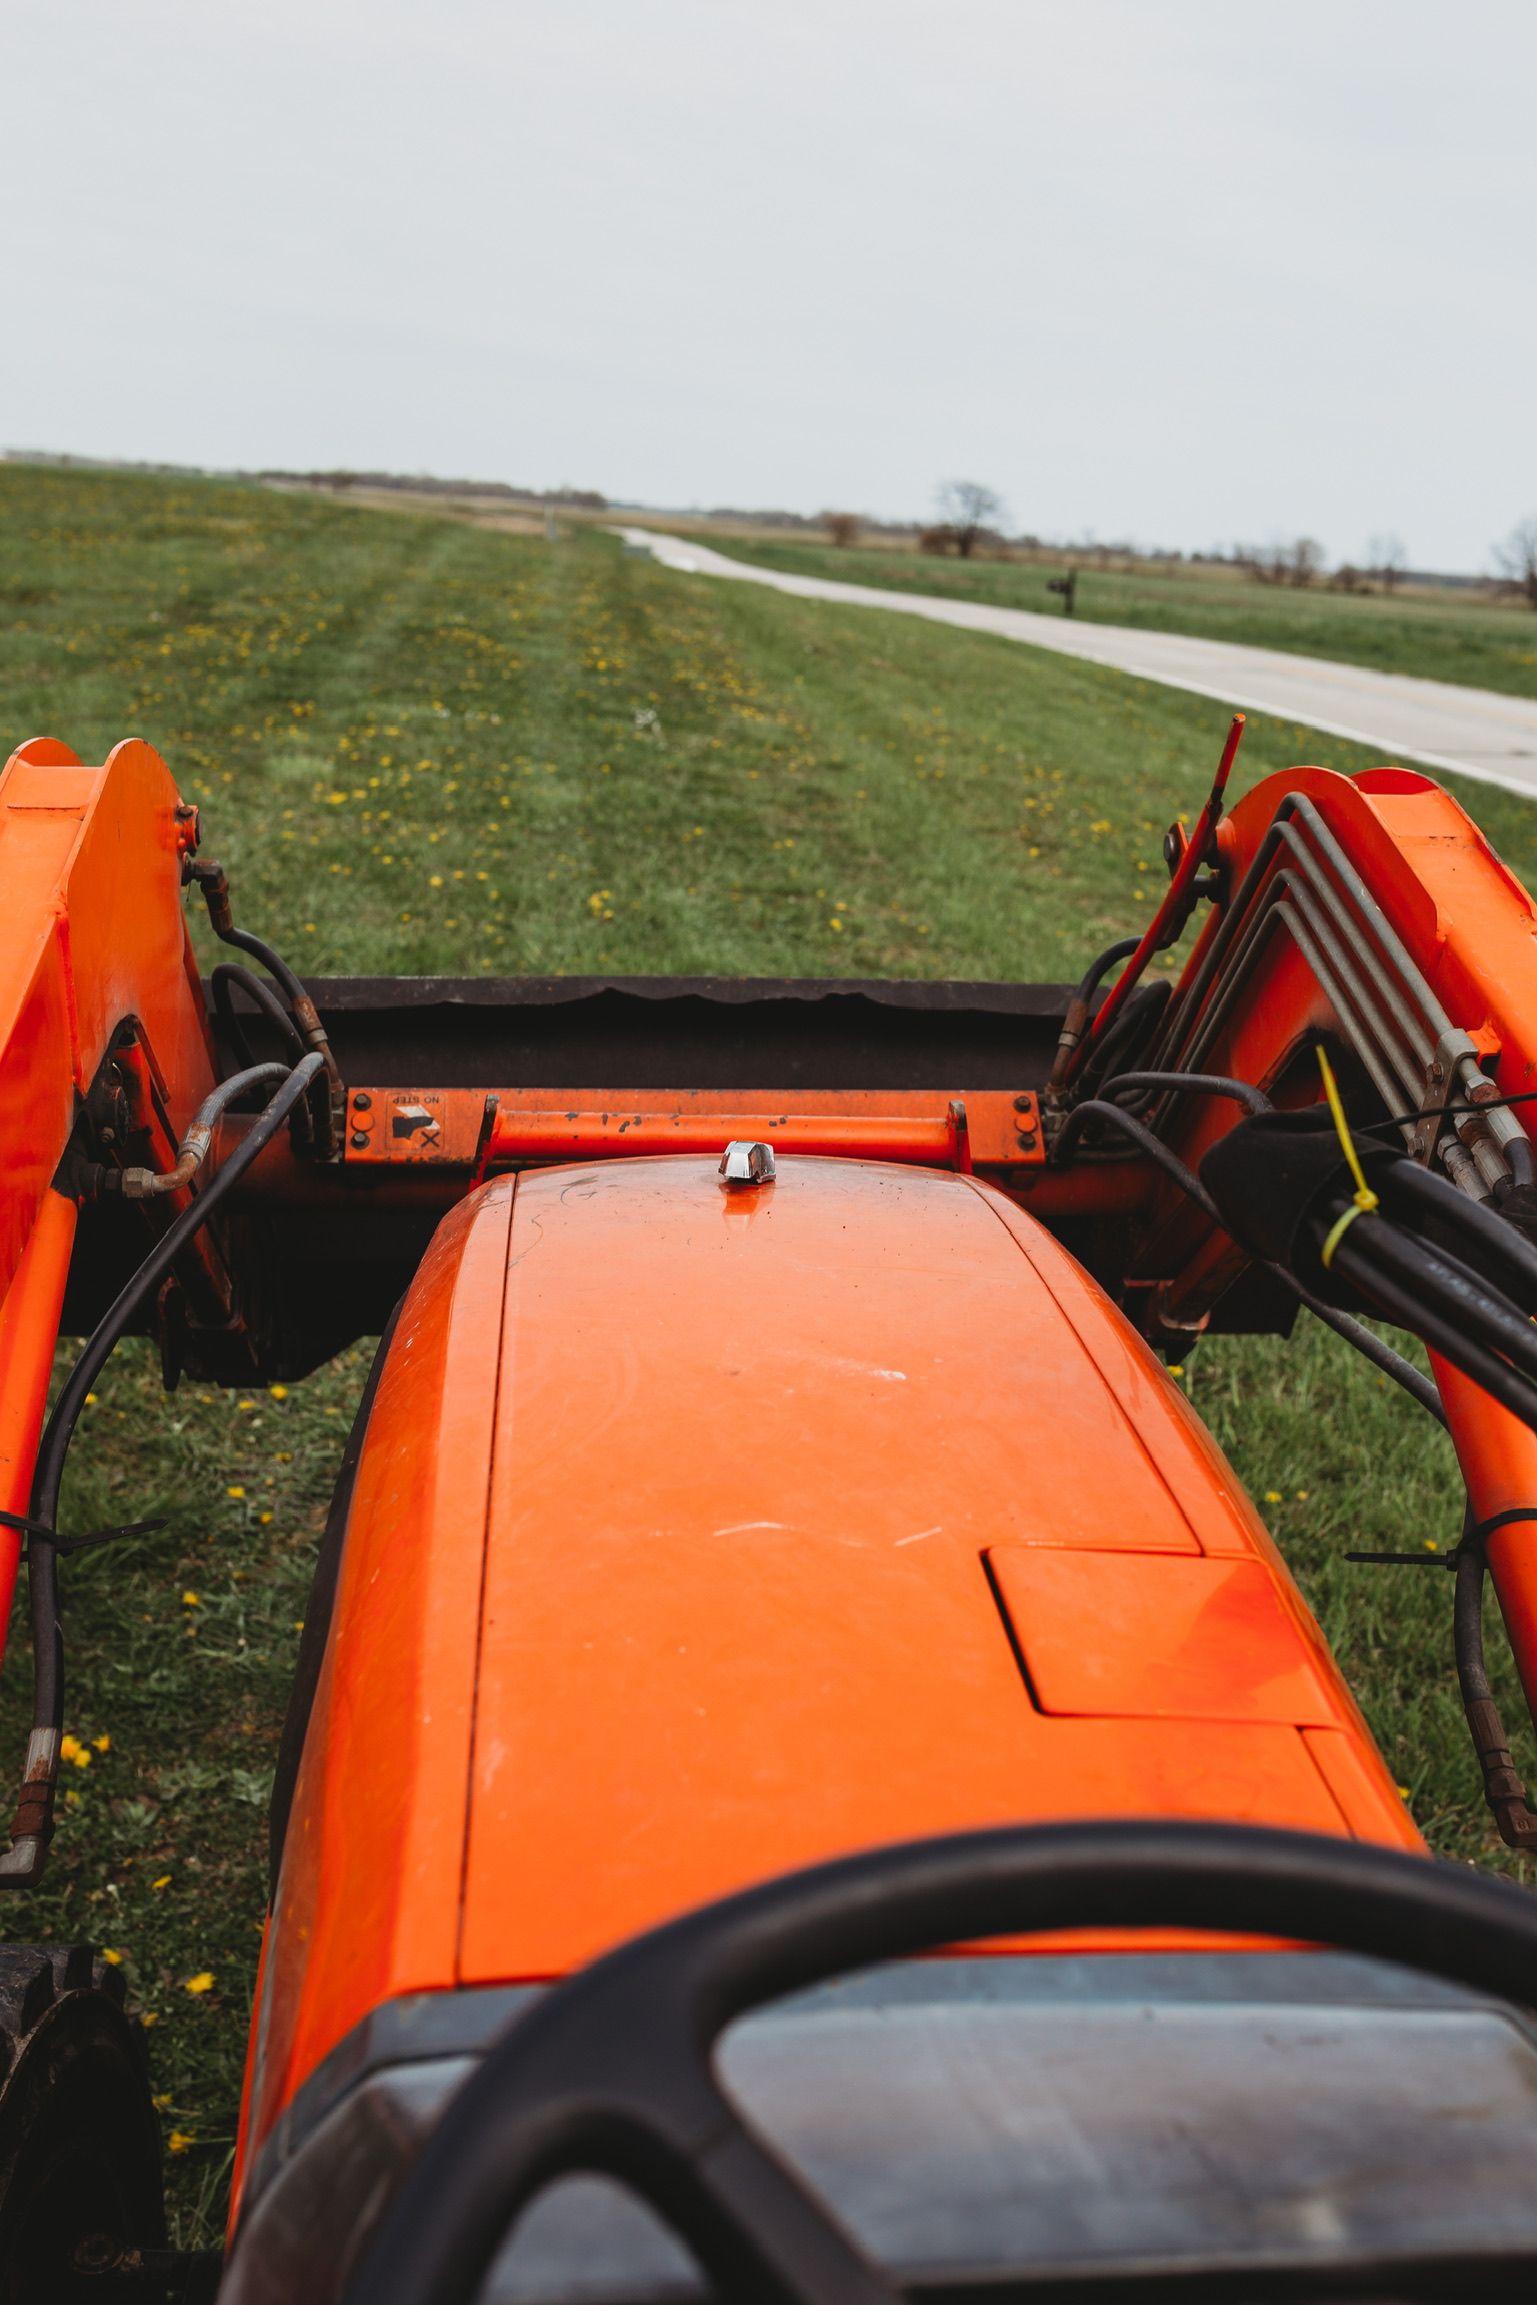 The front of an orange tractor is parked in a grassy field.